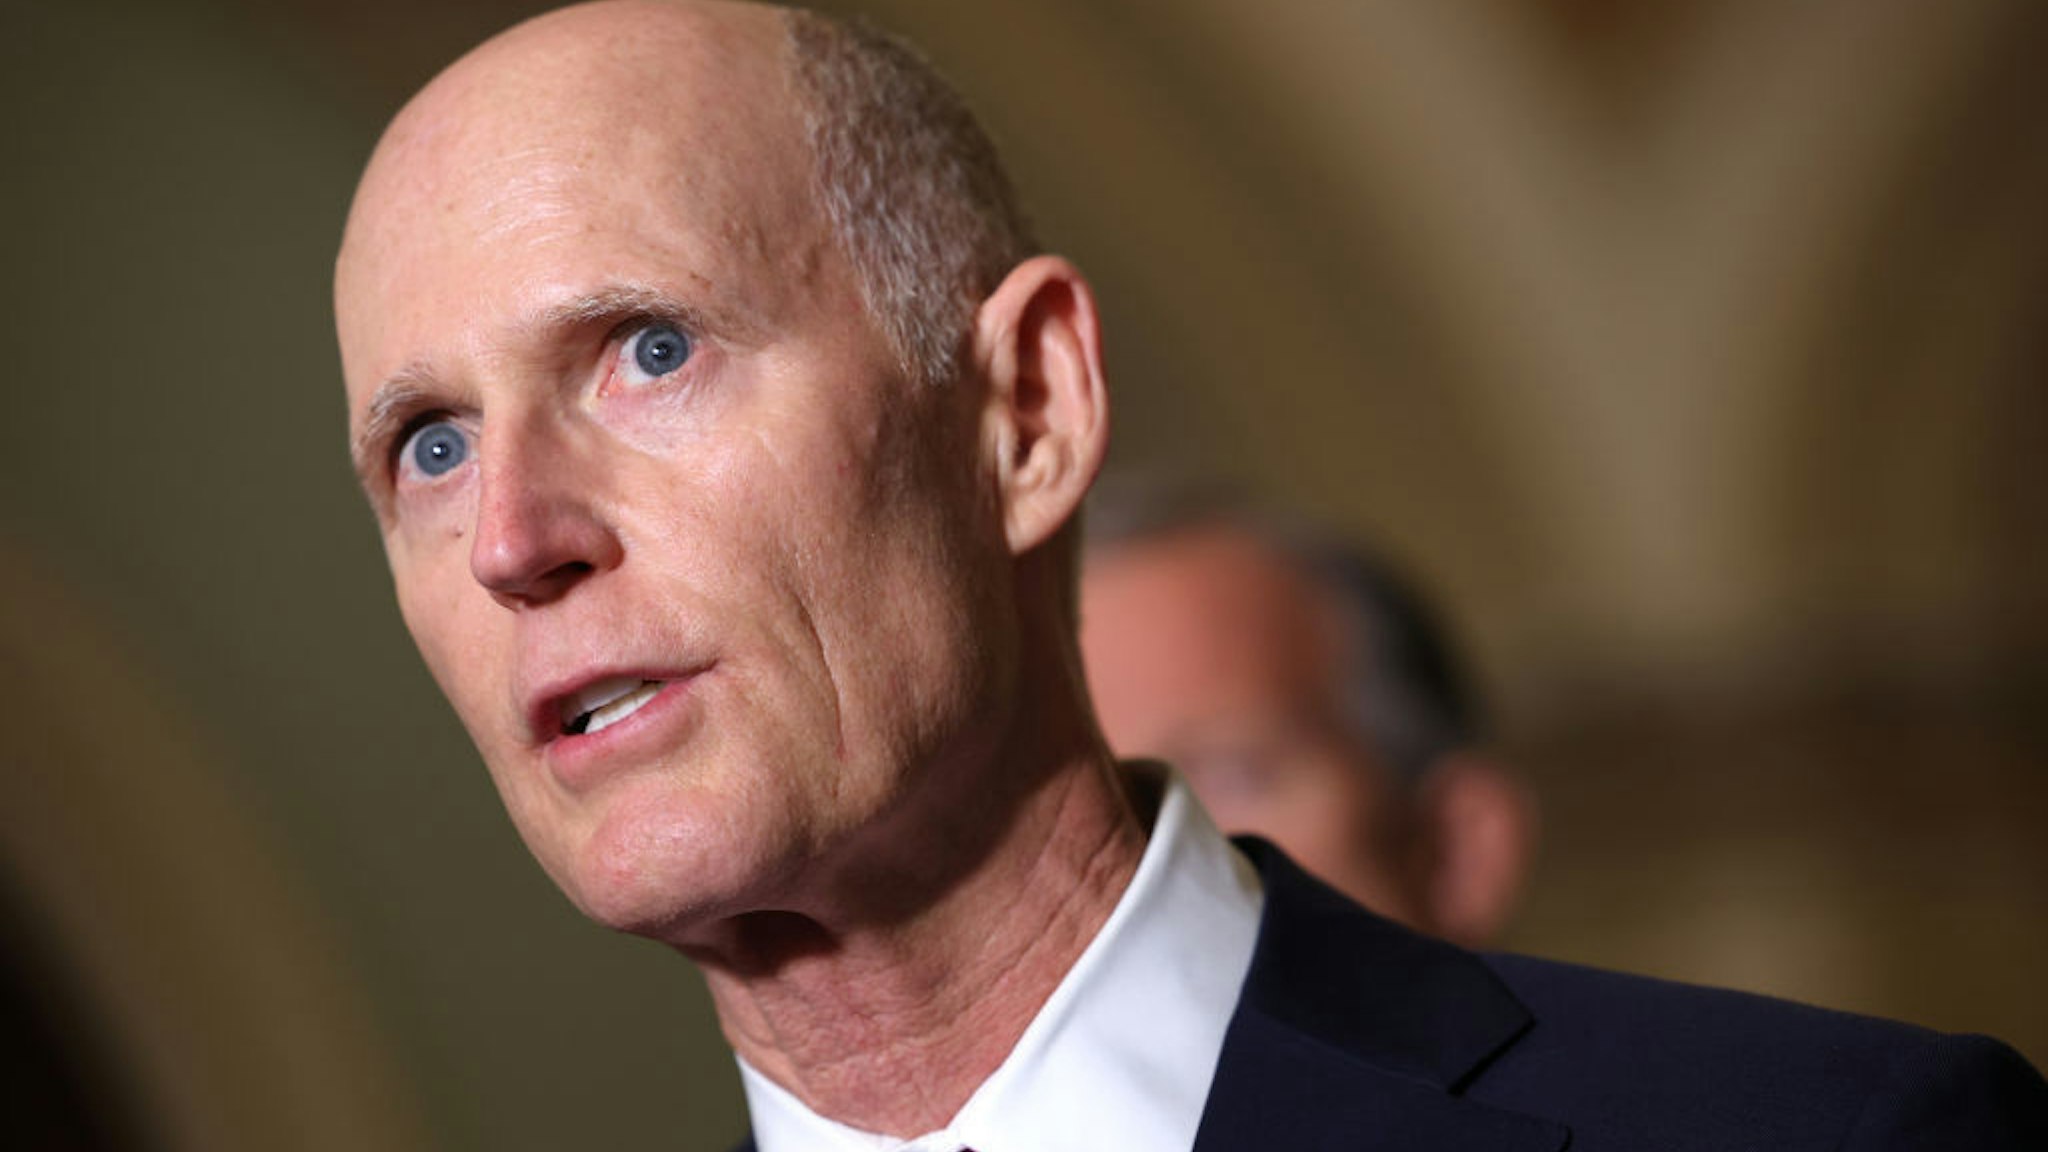 WASHINGTON, DC - JUNE 15: U.S. Sen. Rick Scott (R-FL) speaks to reporters after a Republican Senate luncheon at the U.S. Capitol Building on June 15, 2021 in Washington, DC. The Senate is in negotiations for a bipartisan infrastructure deal. (Photo by Kevin Dietsch/Getty Images)